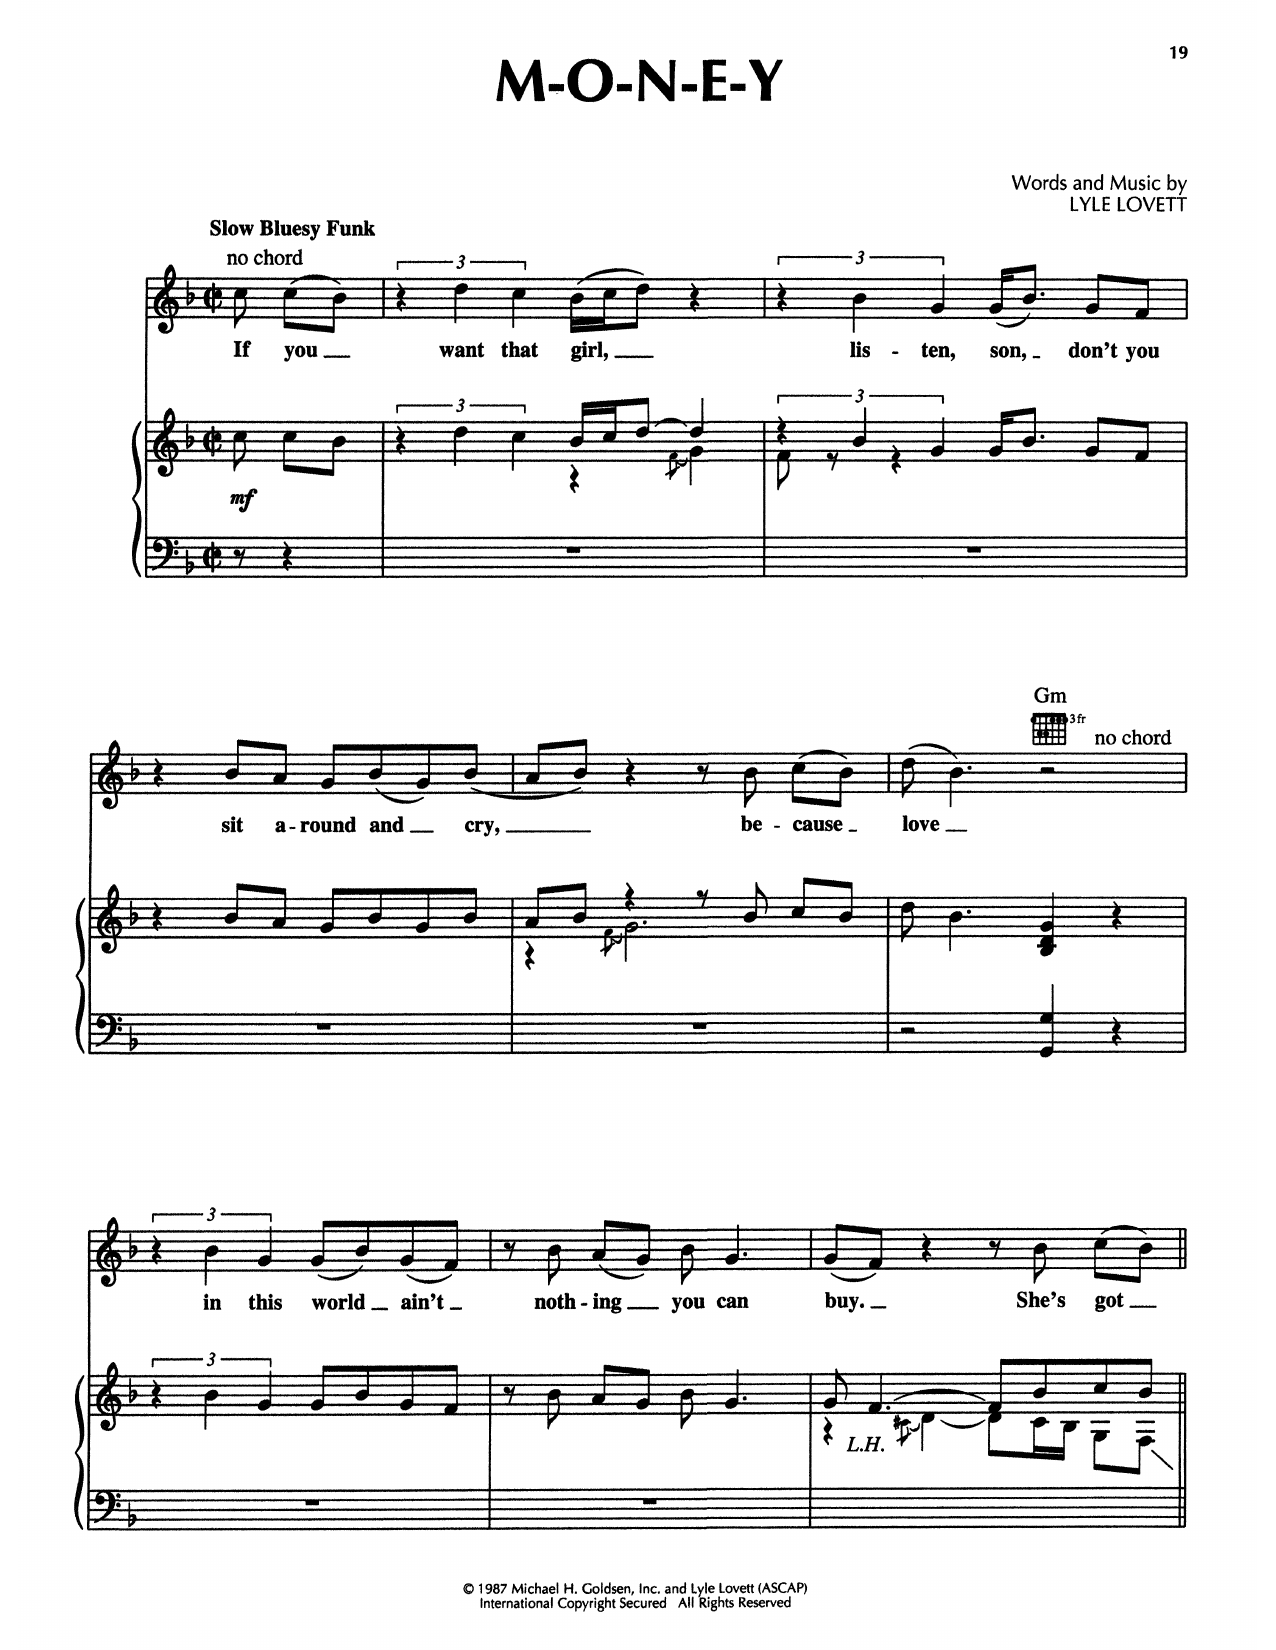 Download Lyle Lovett M-O-N-E-Y (from The Firm) Sheet Music